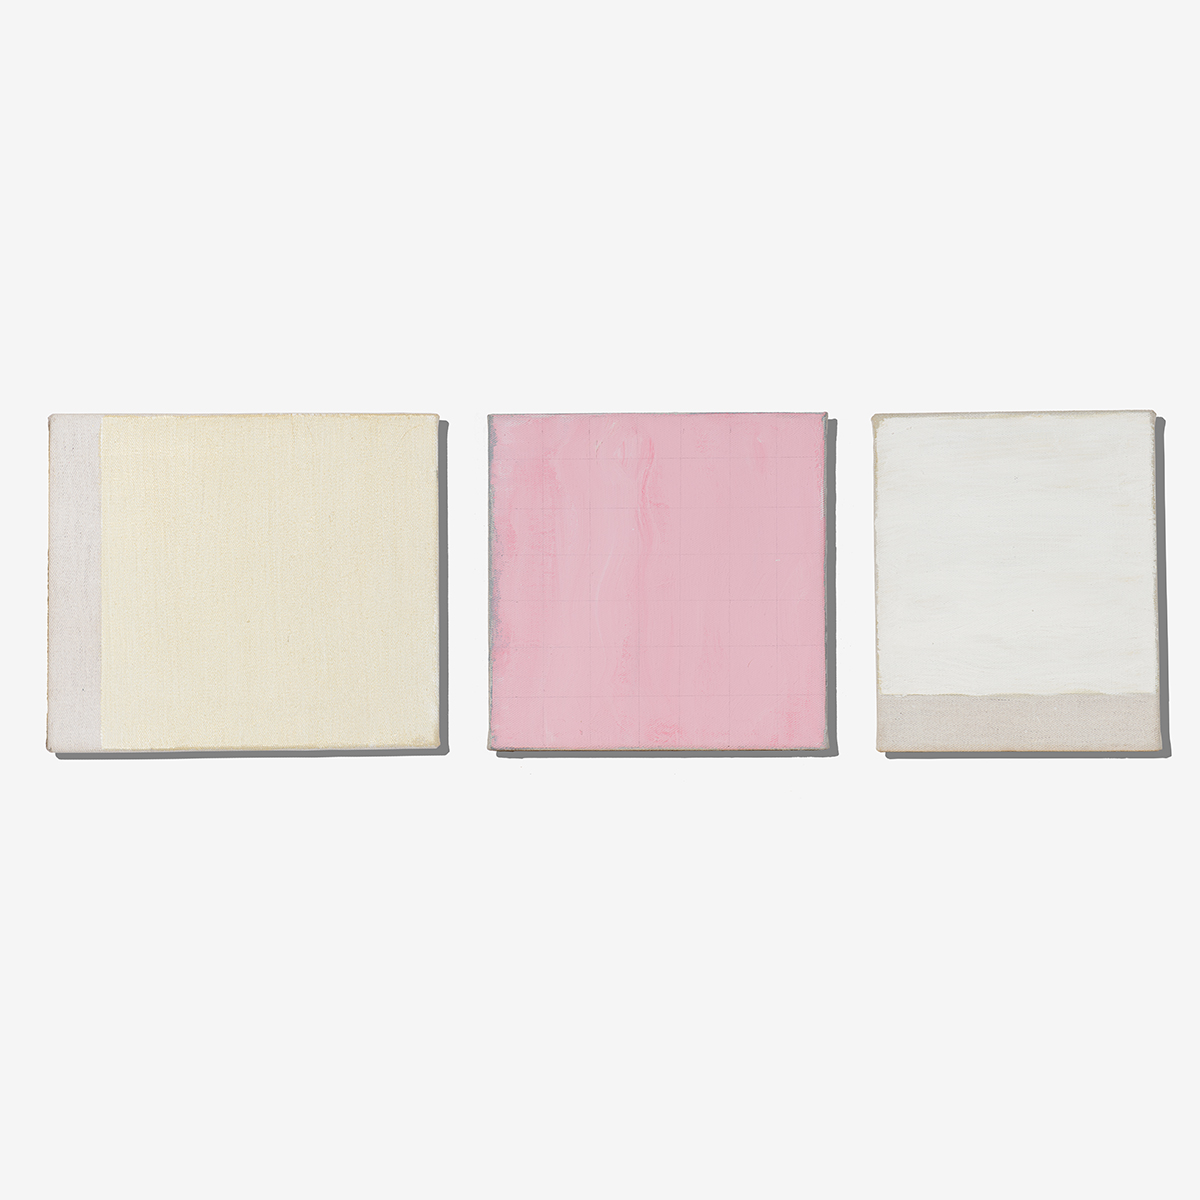 Untitled (triptych) (1988)